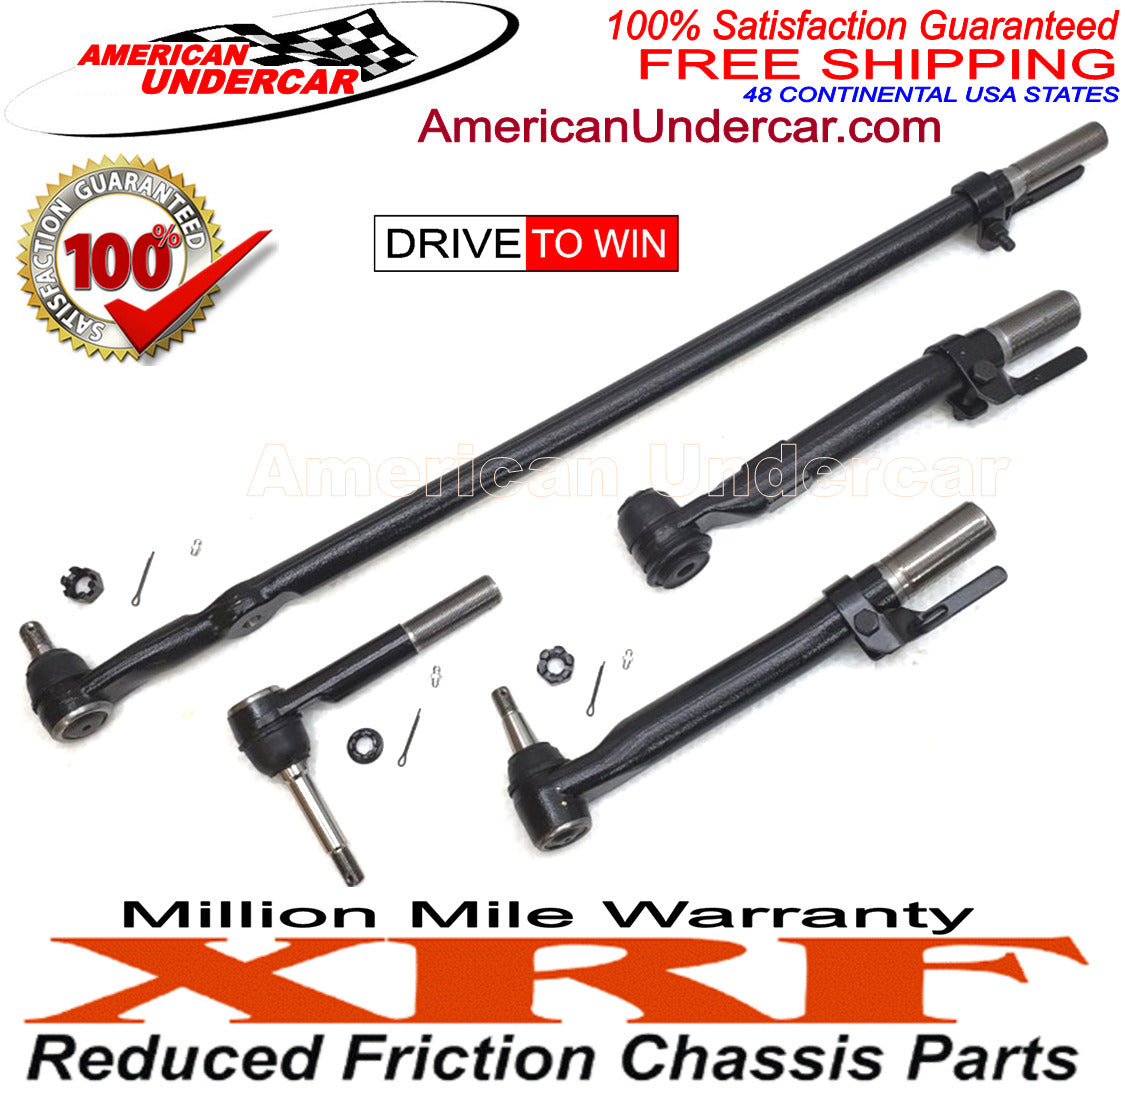 XRF Tie Rod Steering and Suspension Kit for 2011-2016 Ford F250 Super Duty 4x4 Narrow Frame